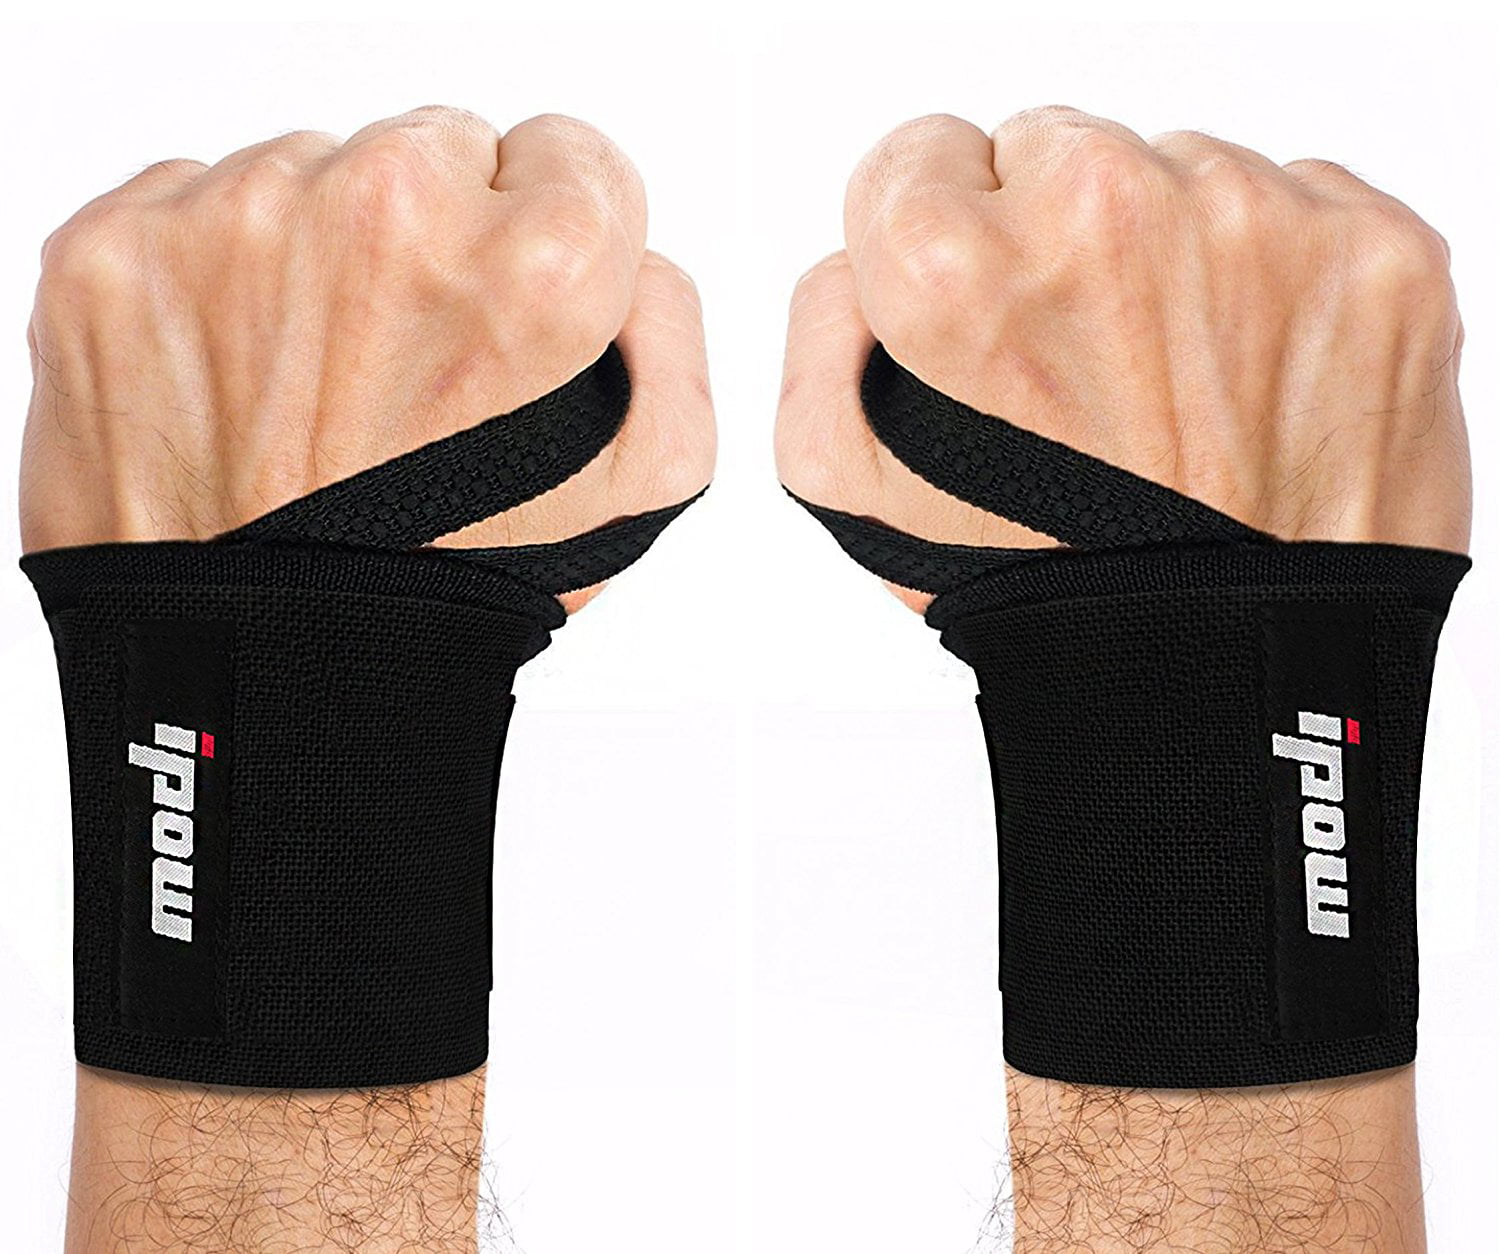 Being fit Weight Lifting Wrist Wraps Support Bodybuilding Fitness Muscle Training Gym Elasticated Cotton Fist Straps Men Women Powerlifting Thumb Loop Support Pro 24” Heavy Duty Braces